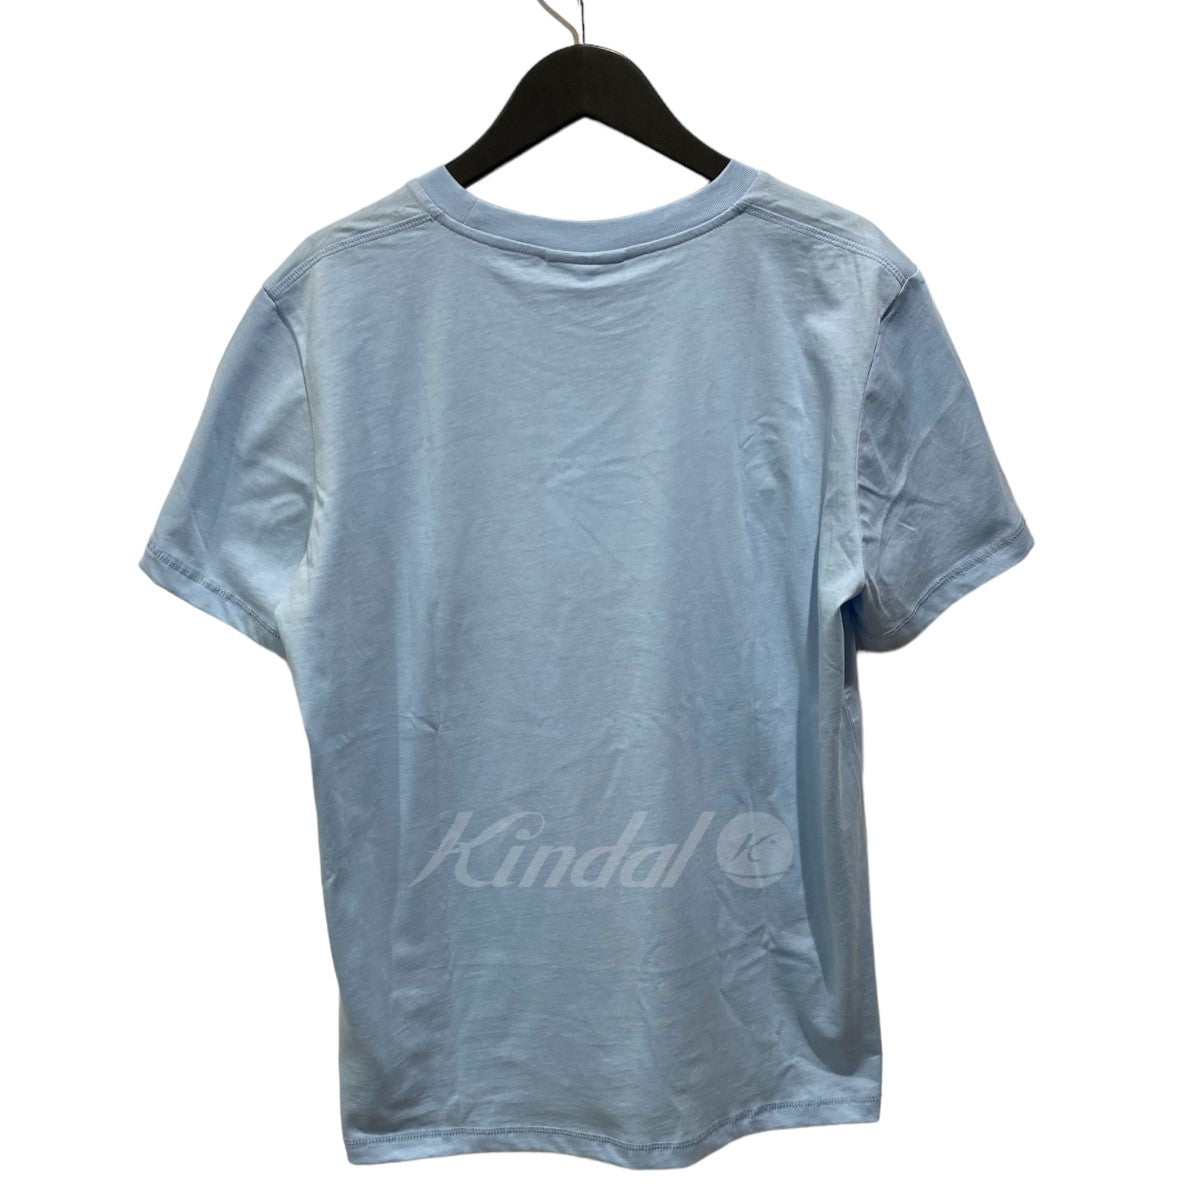 THIN JERSEY LOVECLUB RELAXED T-SHIRTS ロゴTシャツ